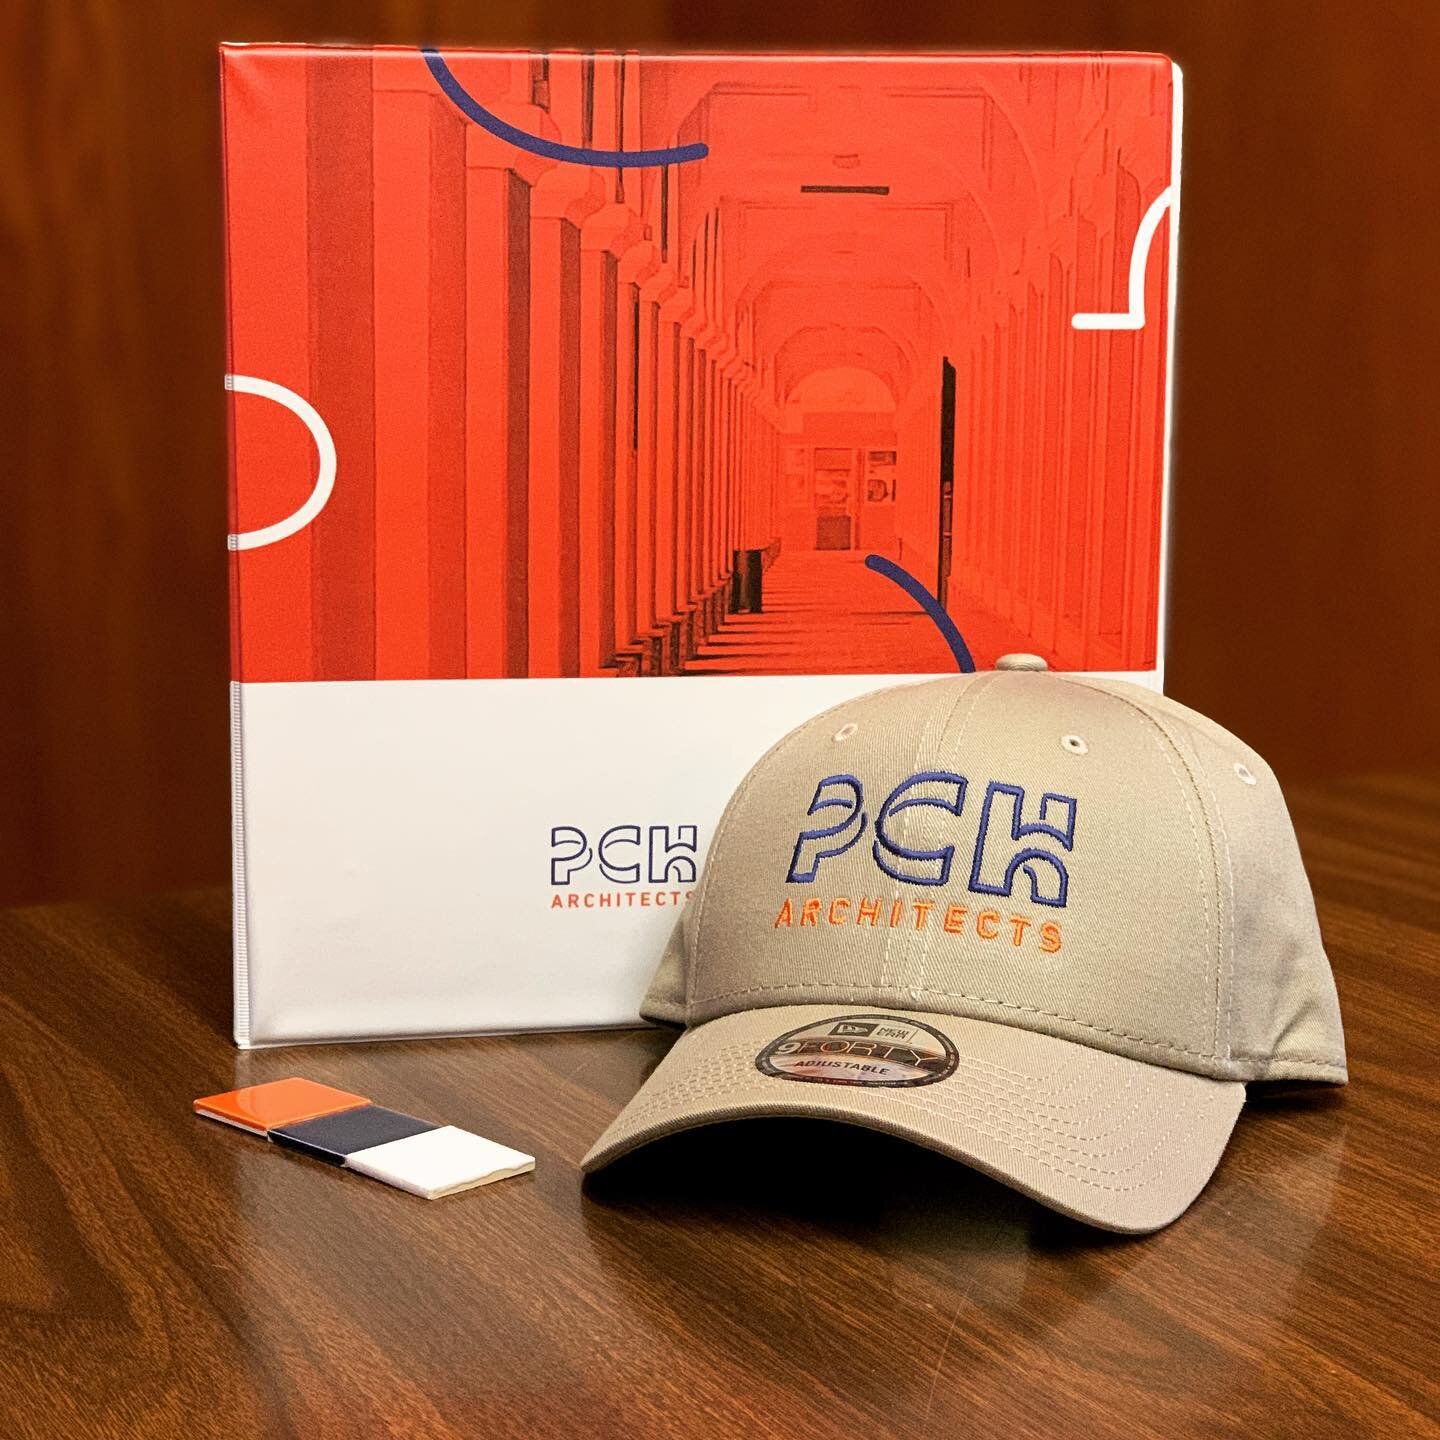 With a great cap, comes great responsibility
#pcharchitects #architecturefirm #officegear #teamgear